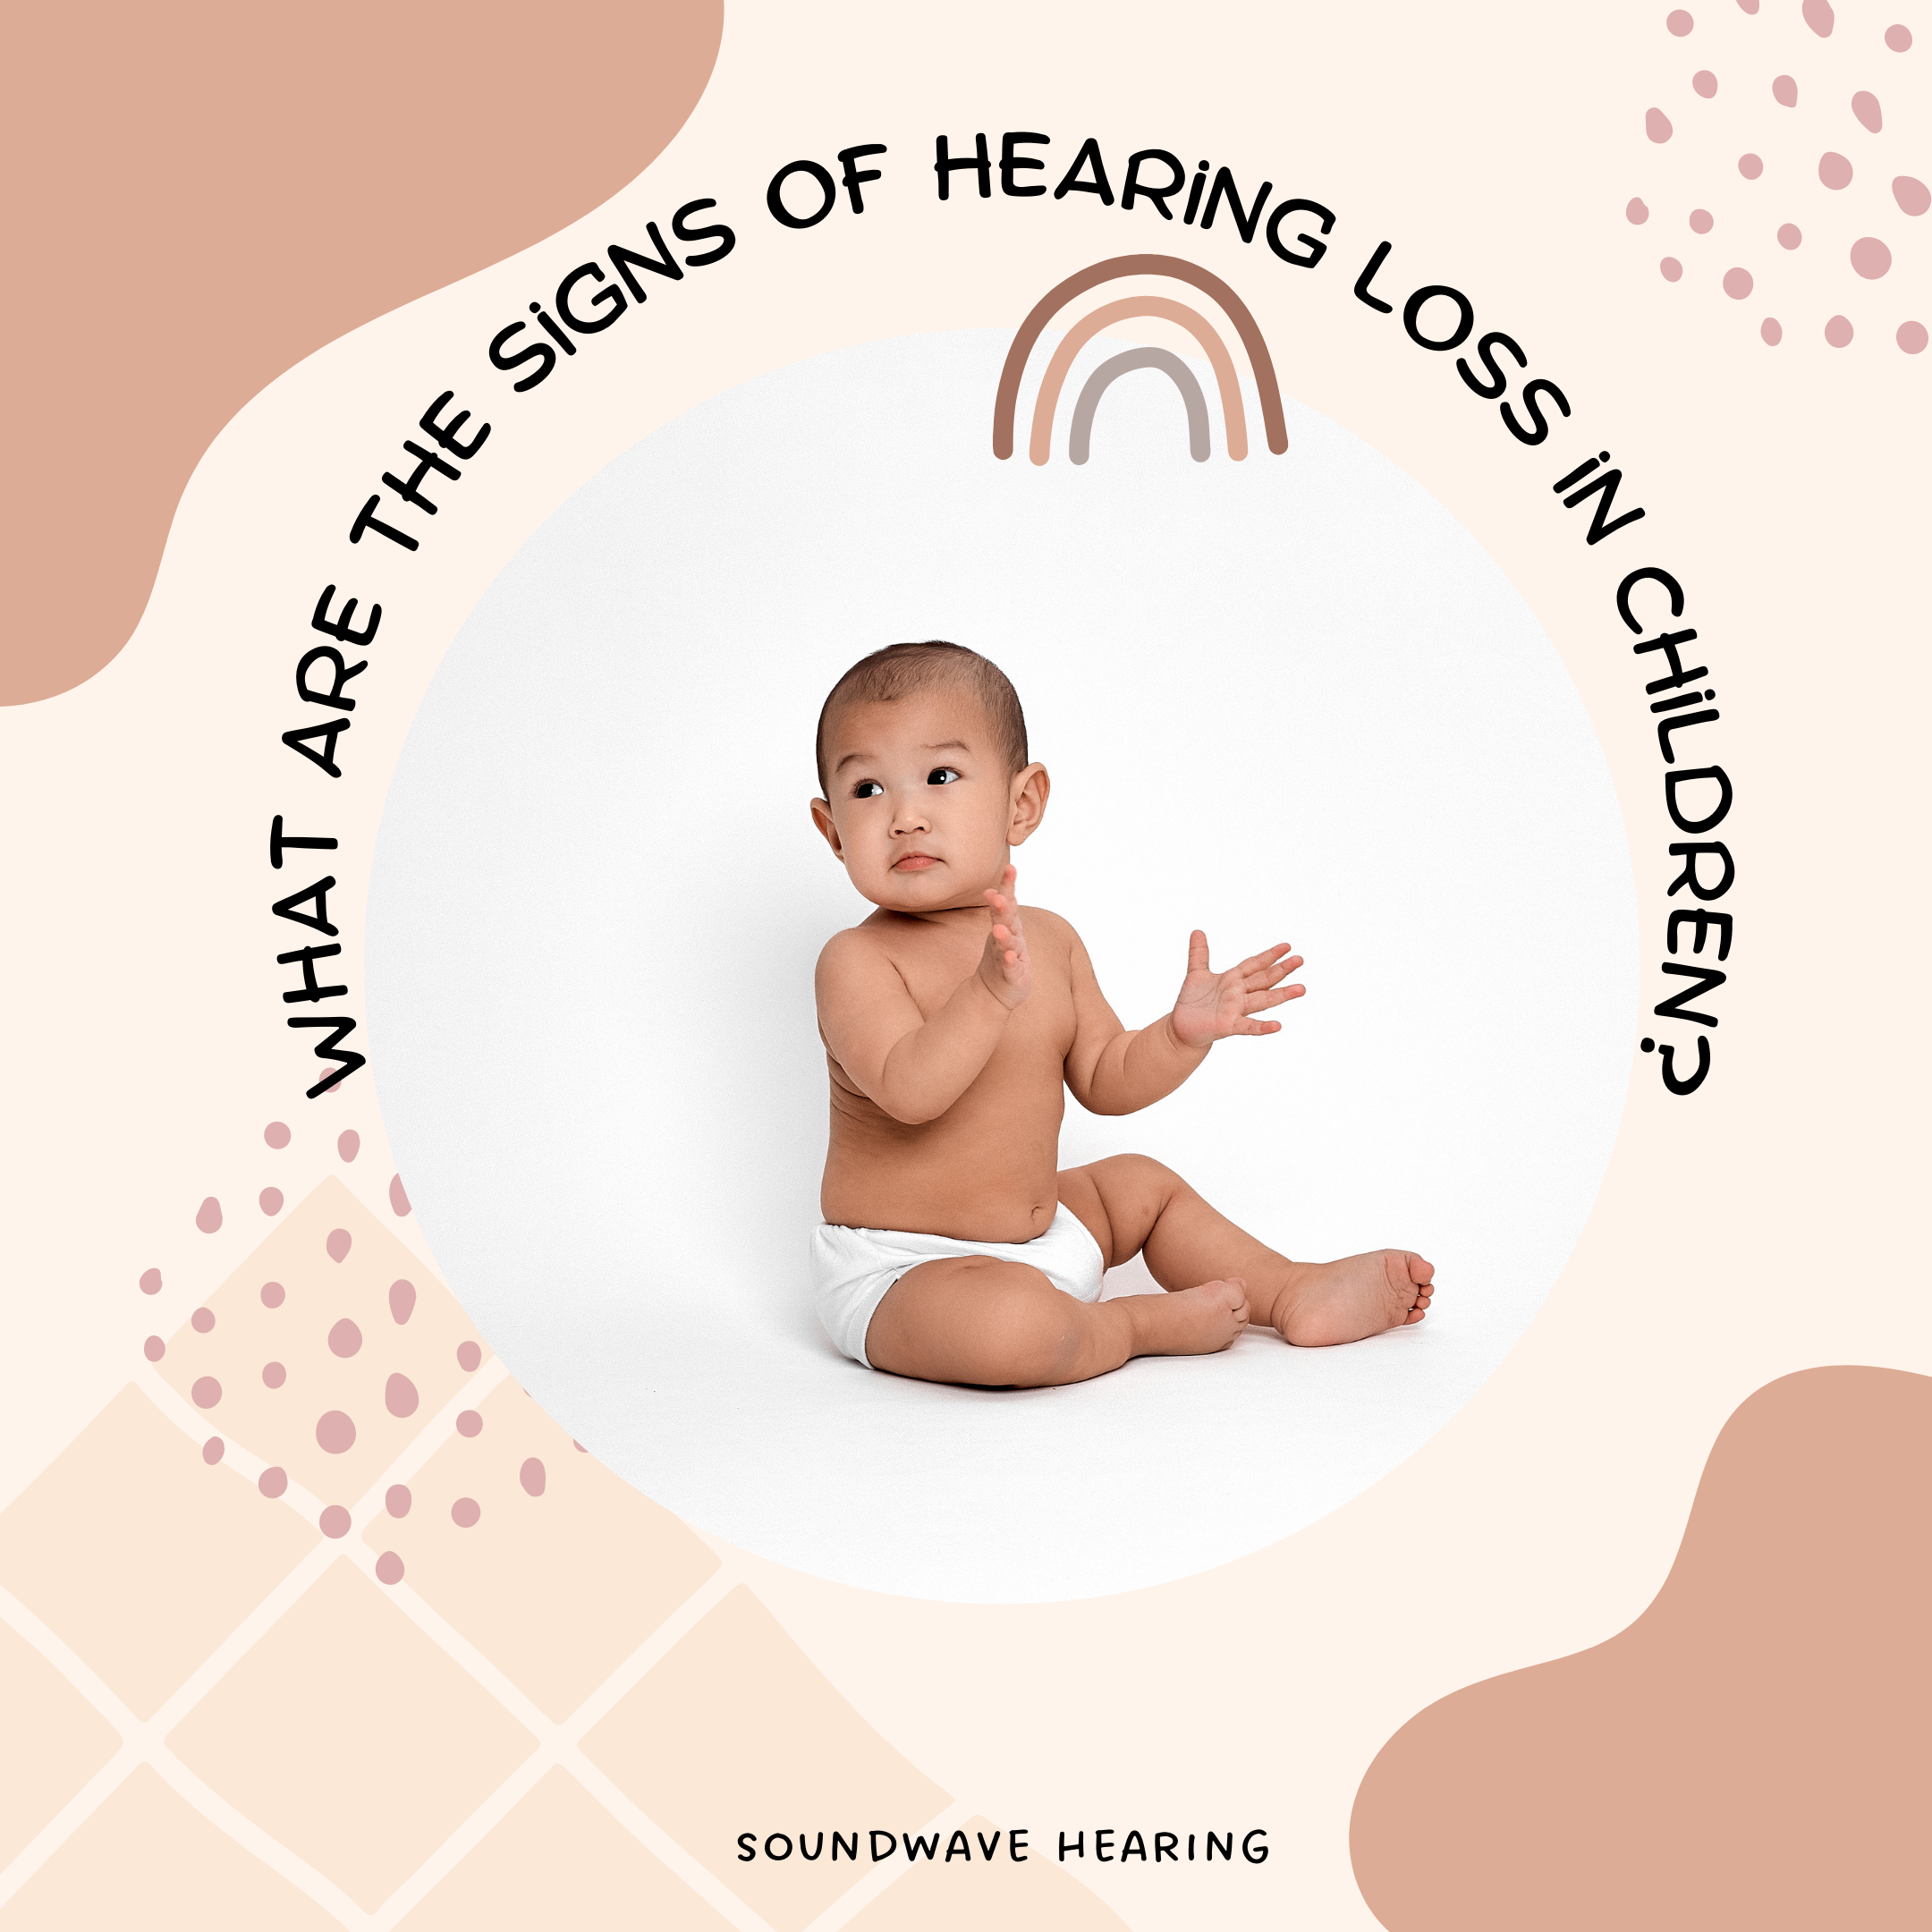 What are the Signs of Hearing Loss in Children?